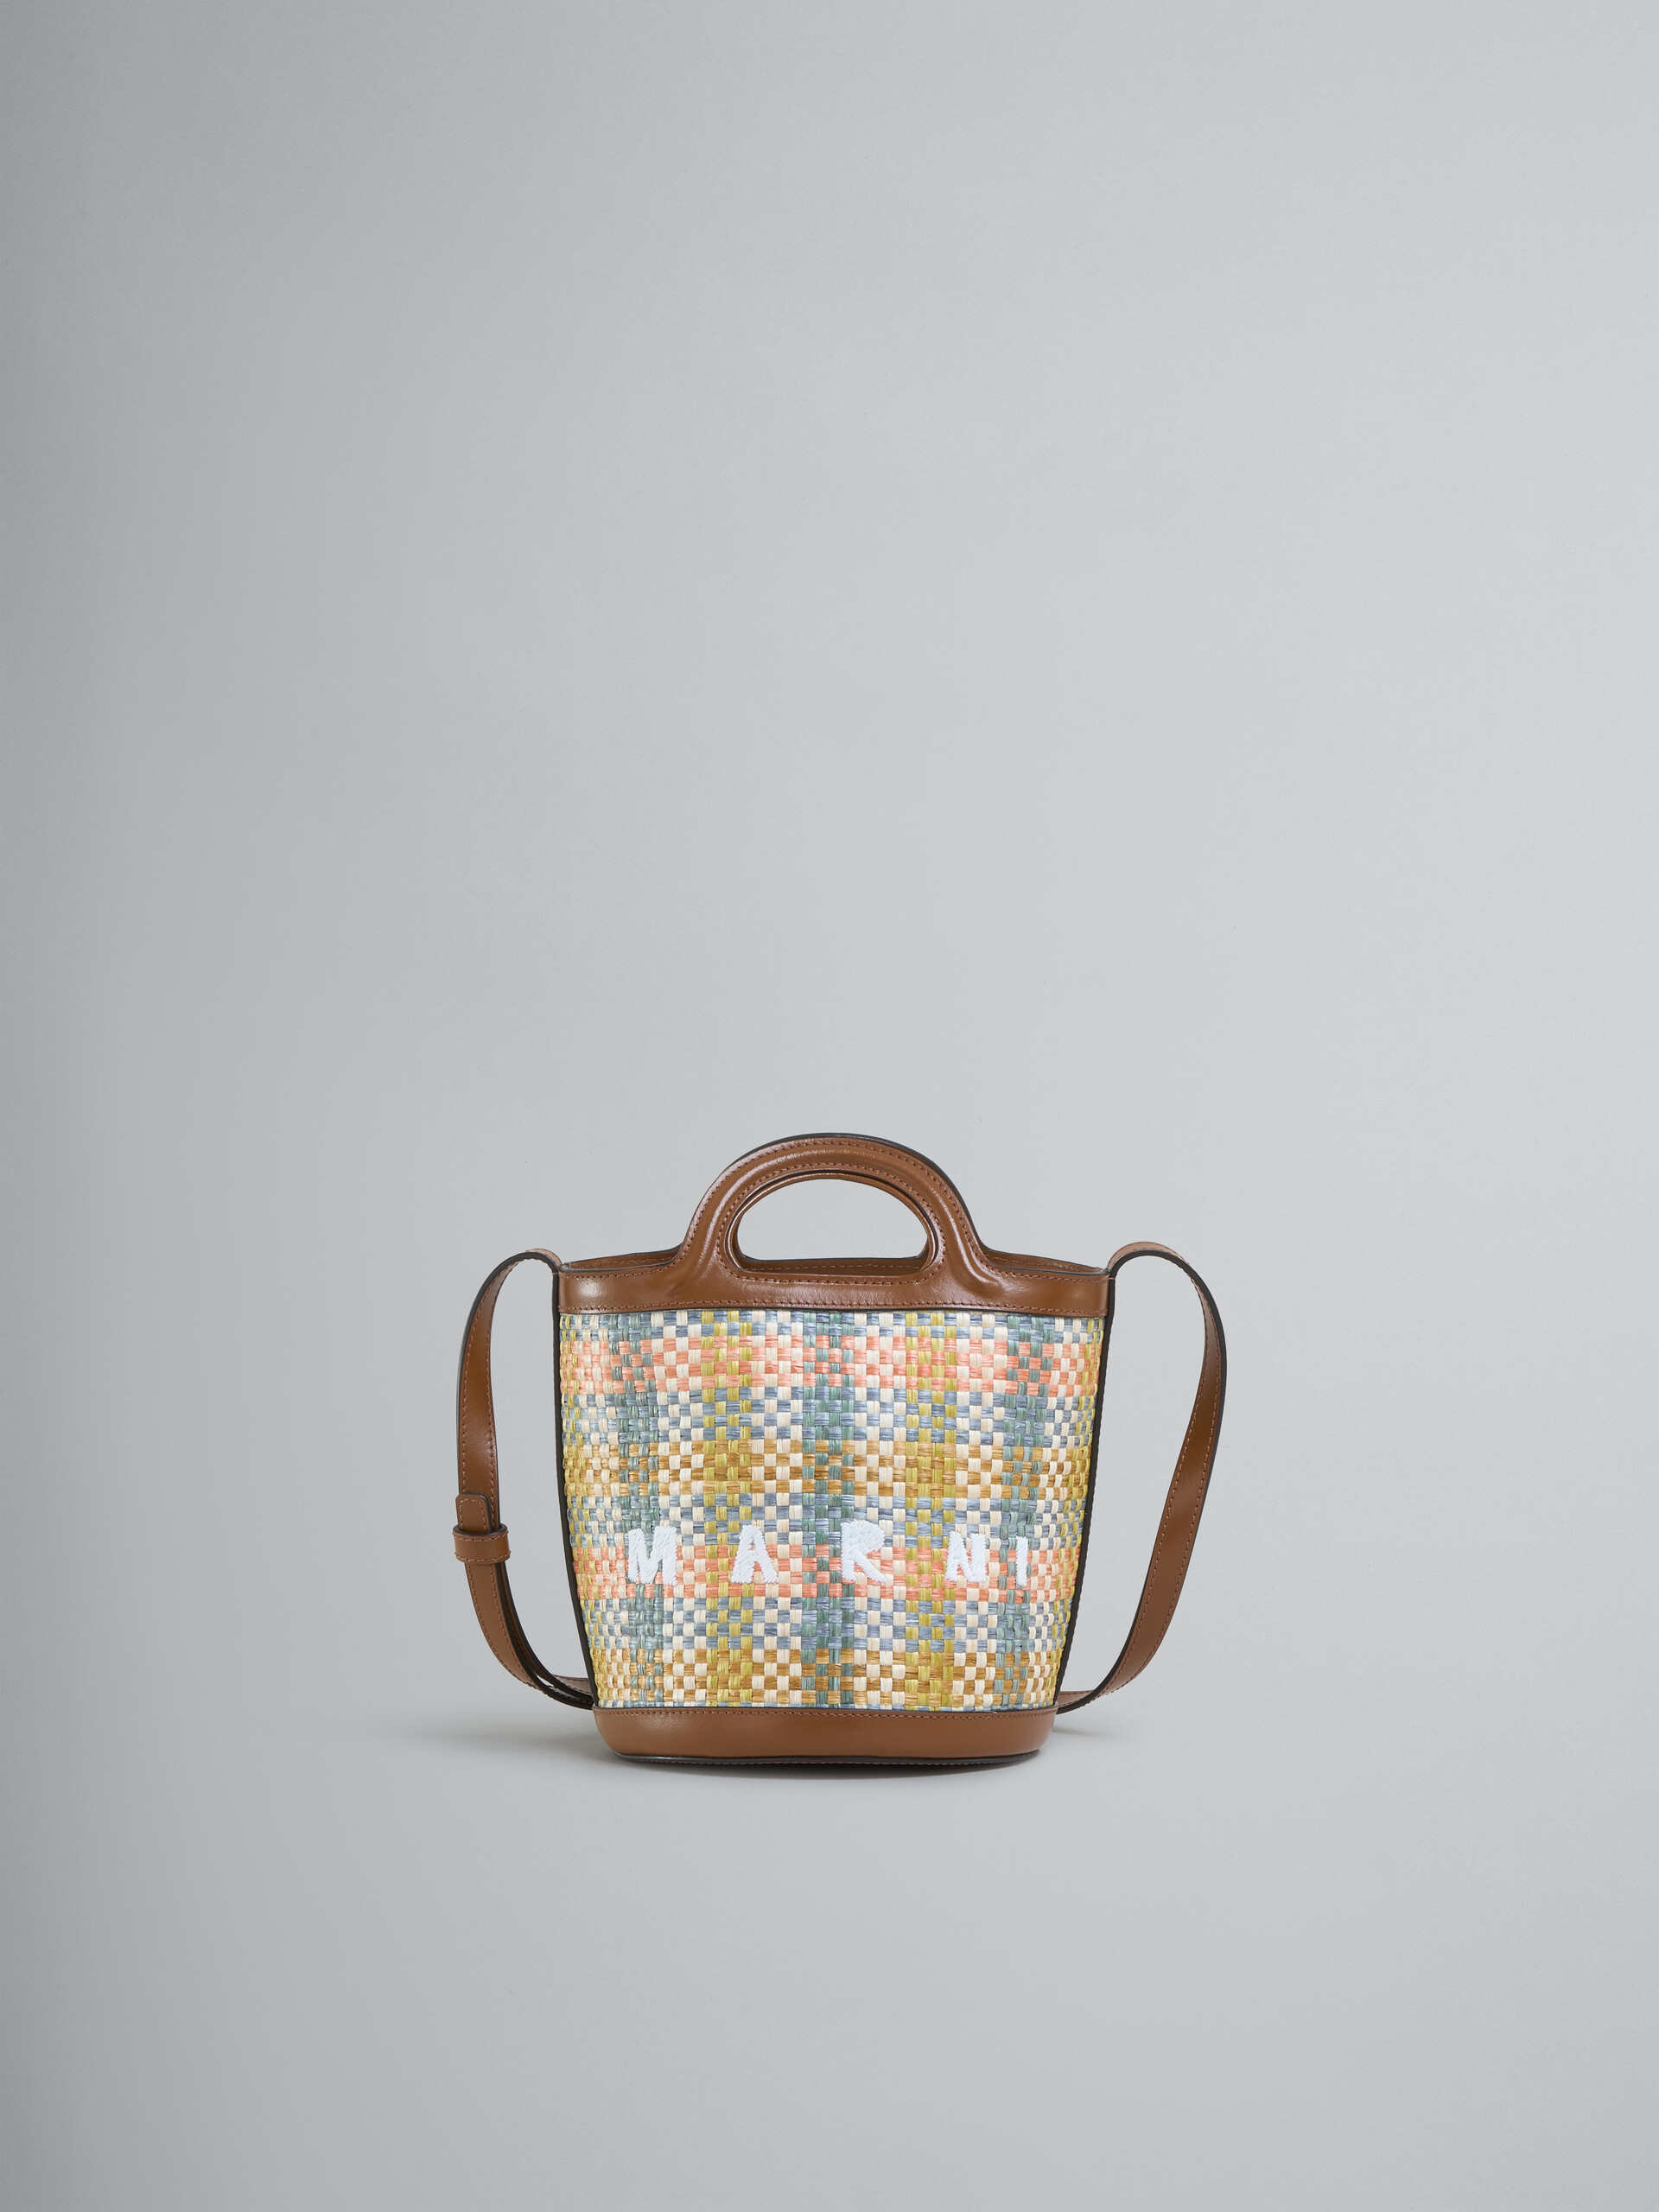 Tropicalia small bucket bag in brown leather and checked raffia-effect fabric - Shoulder Bags - Image 1